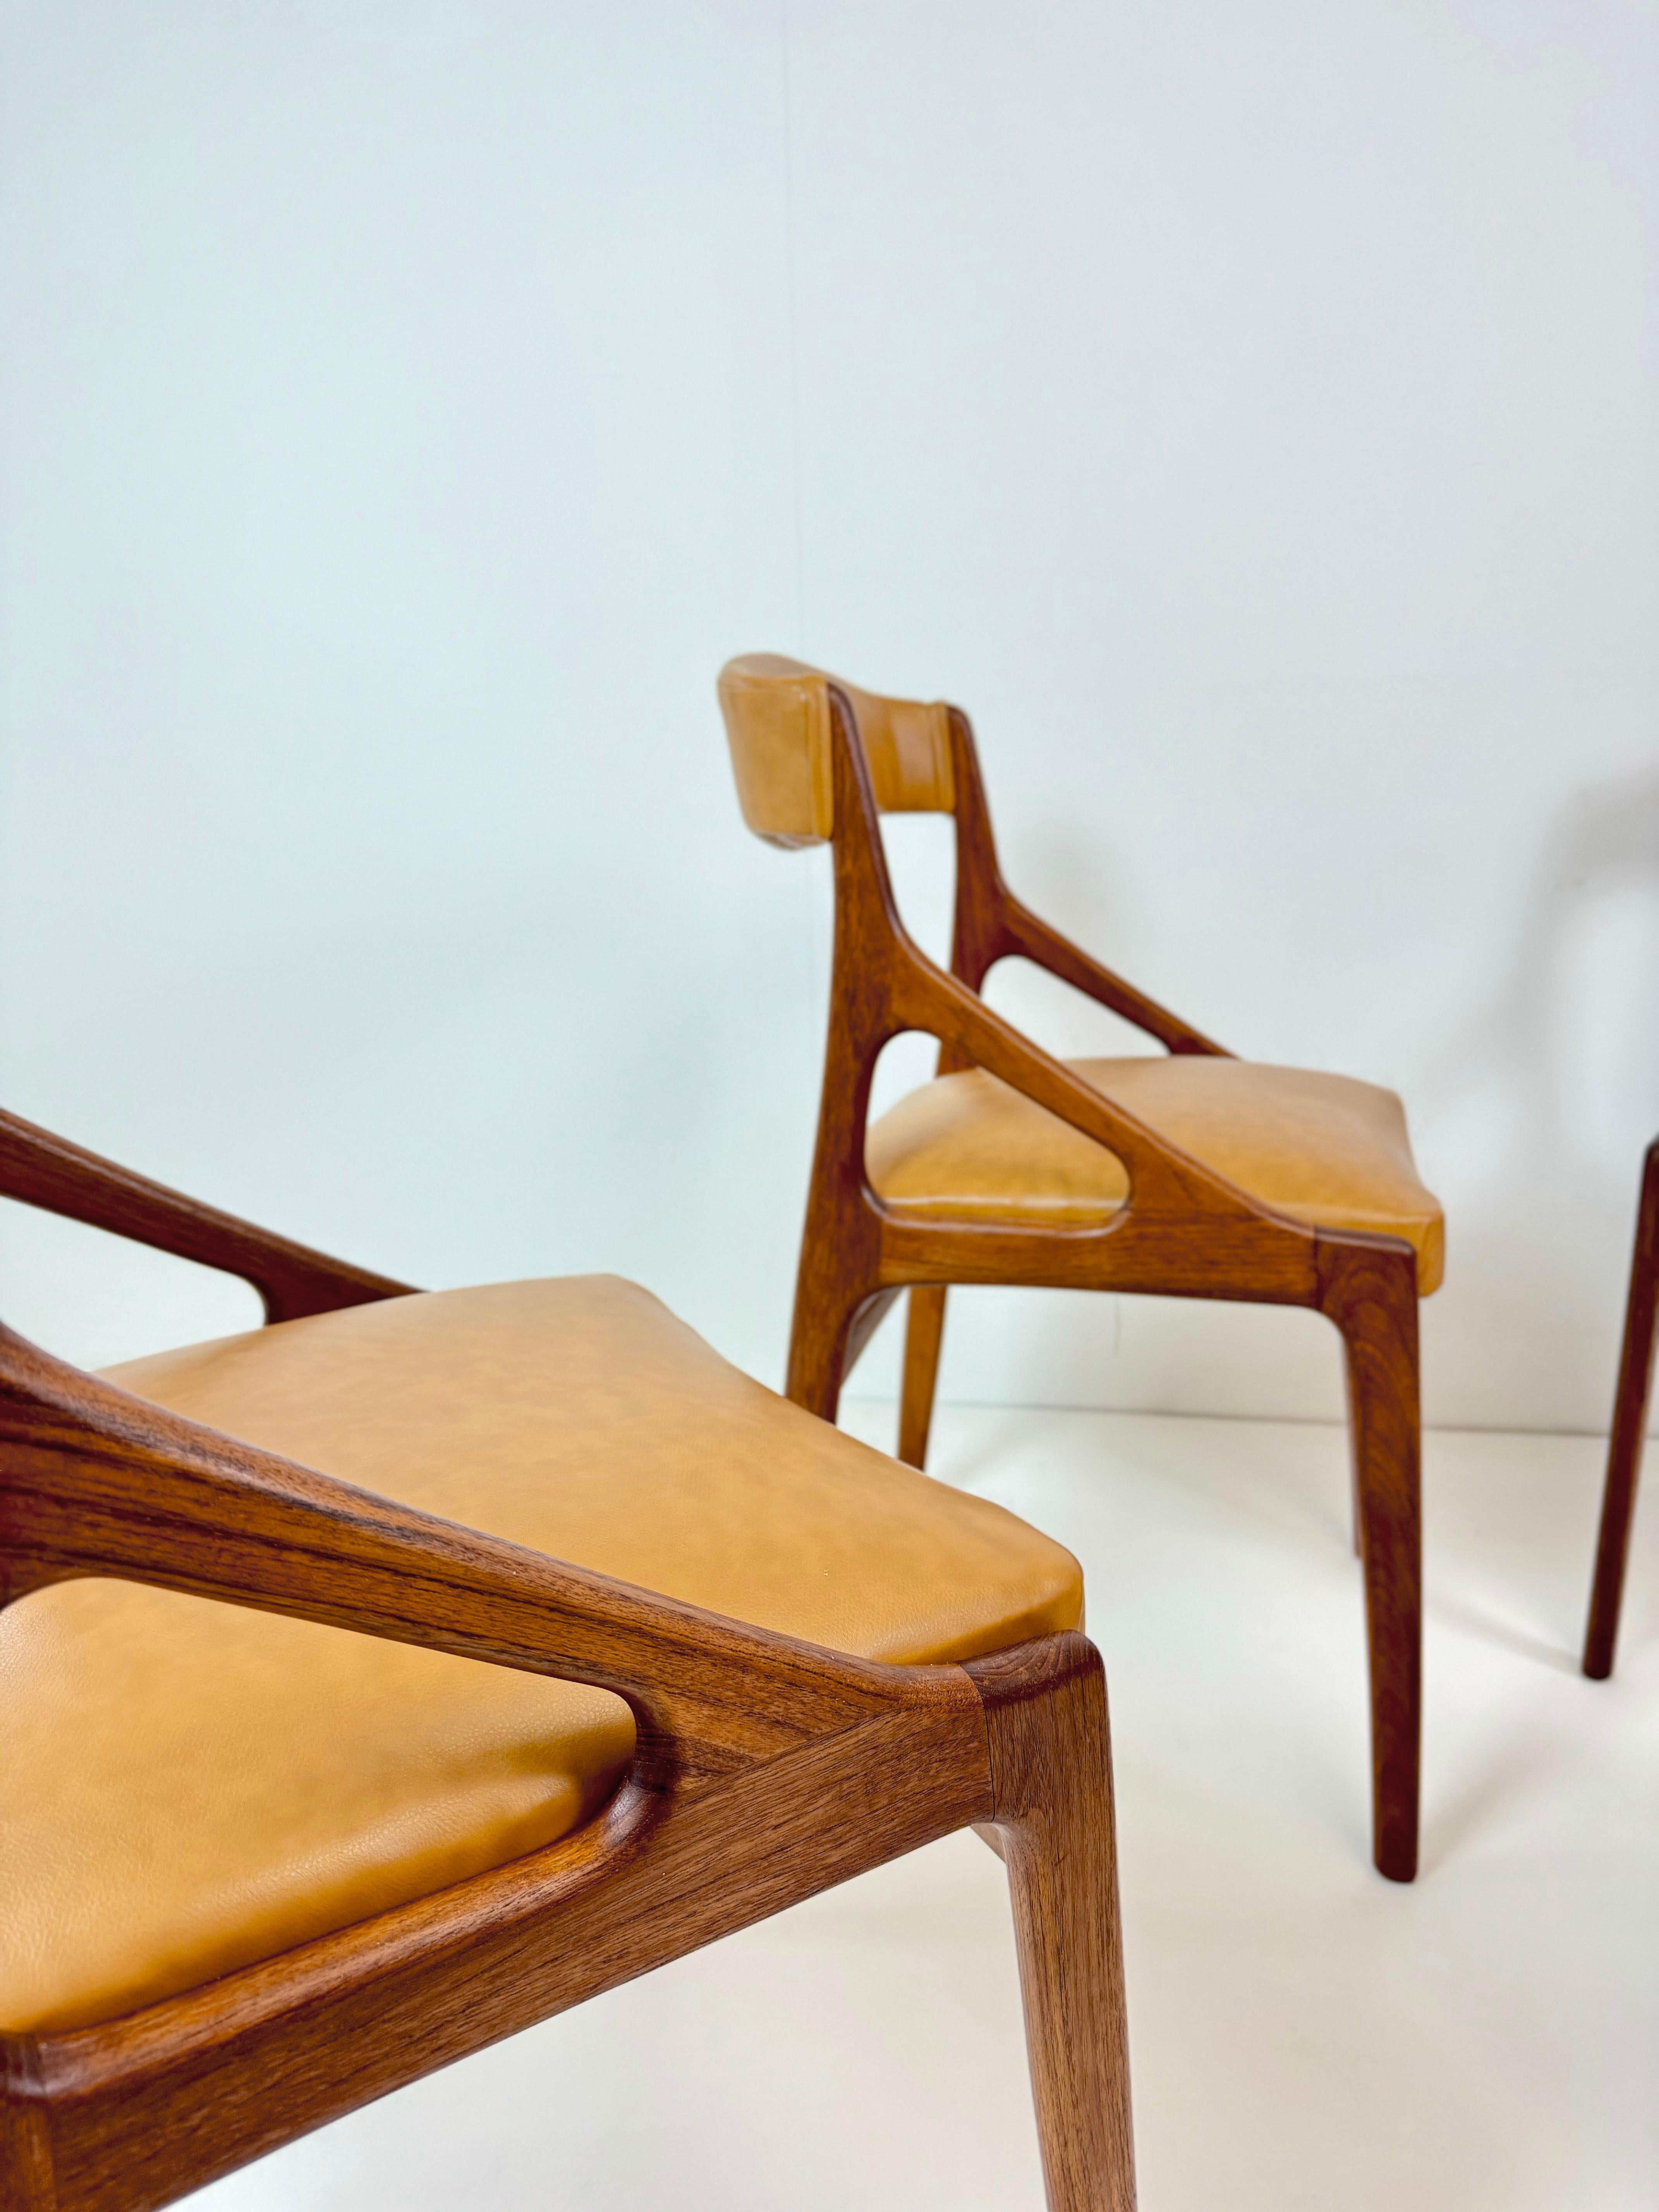 Faux Leather Set of Four Midcentury Modern Teak and Leatherette Dining Chairs c.1960's For Sale